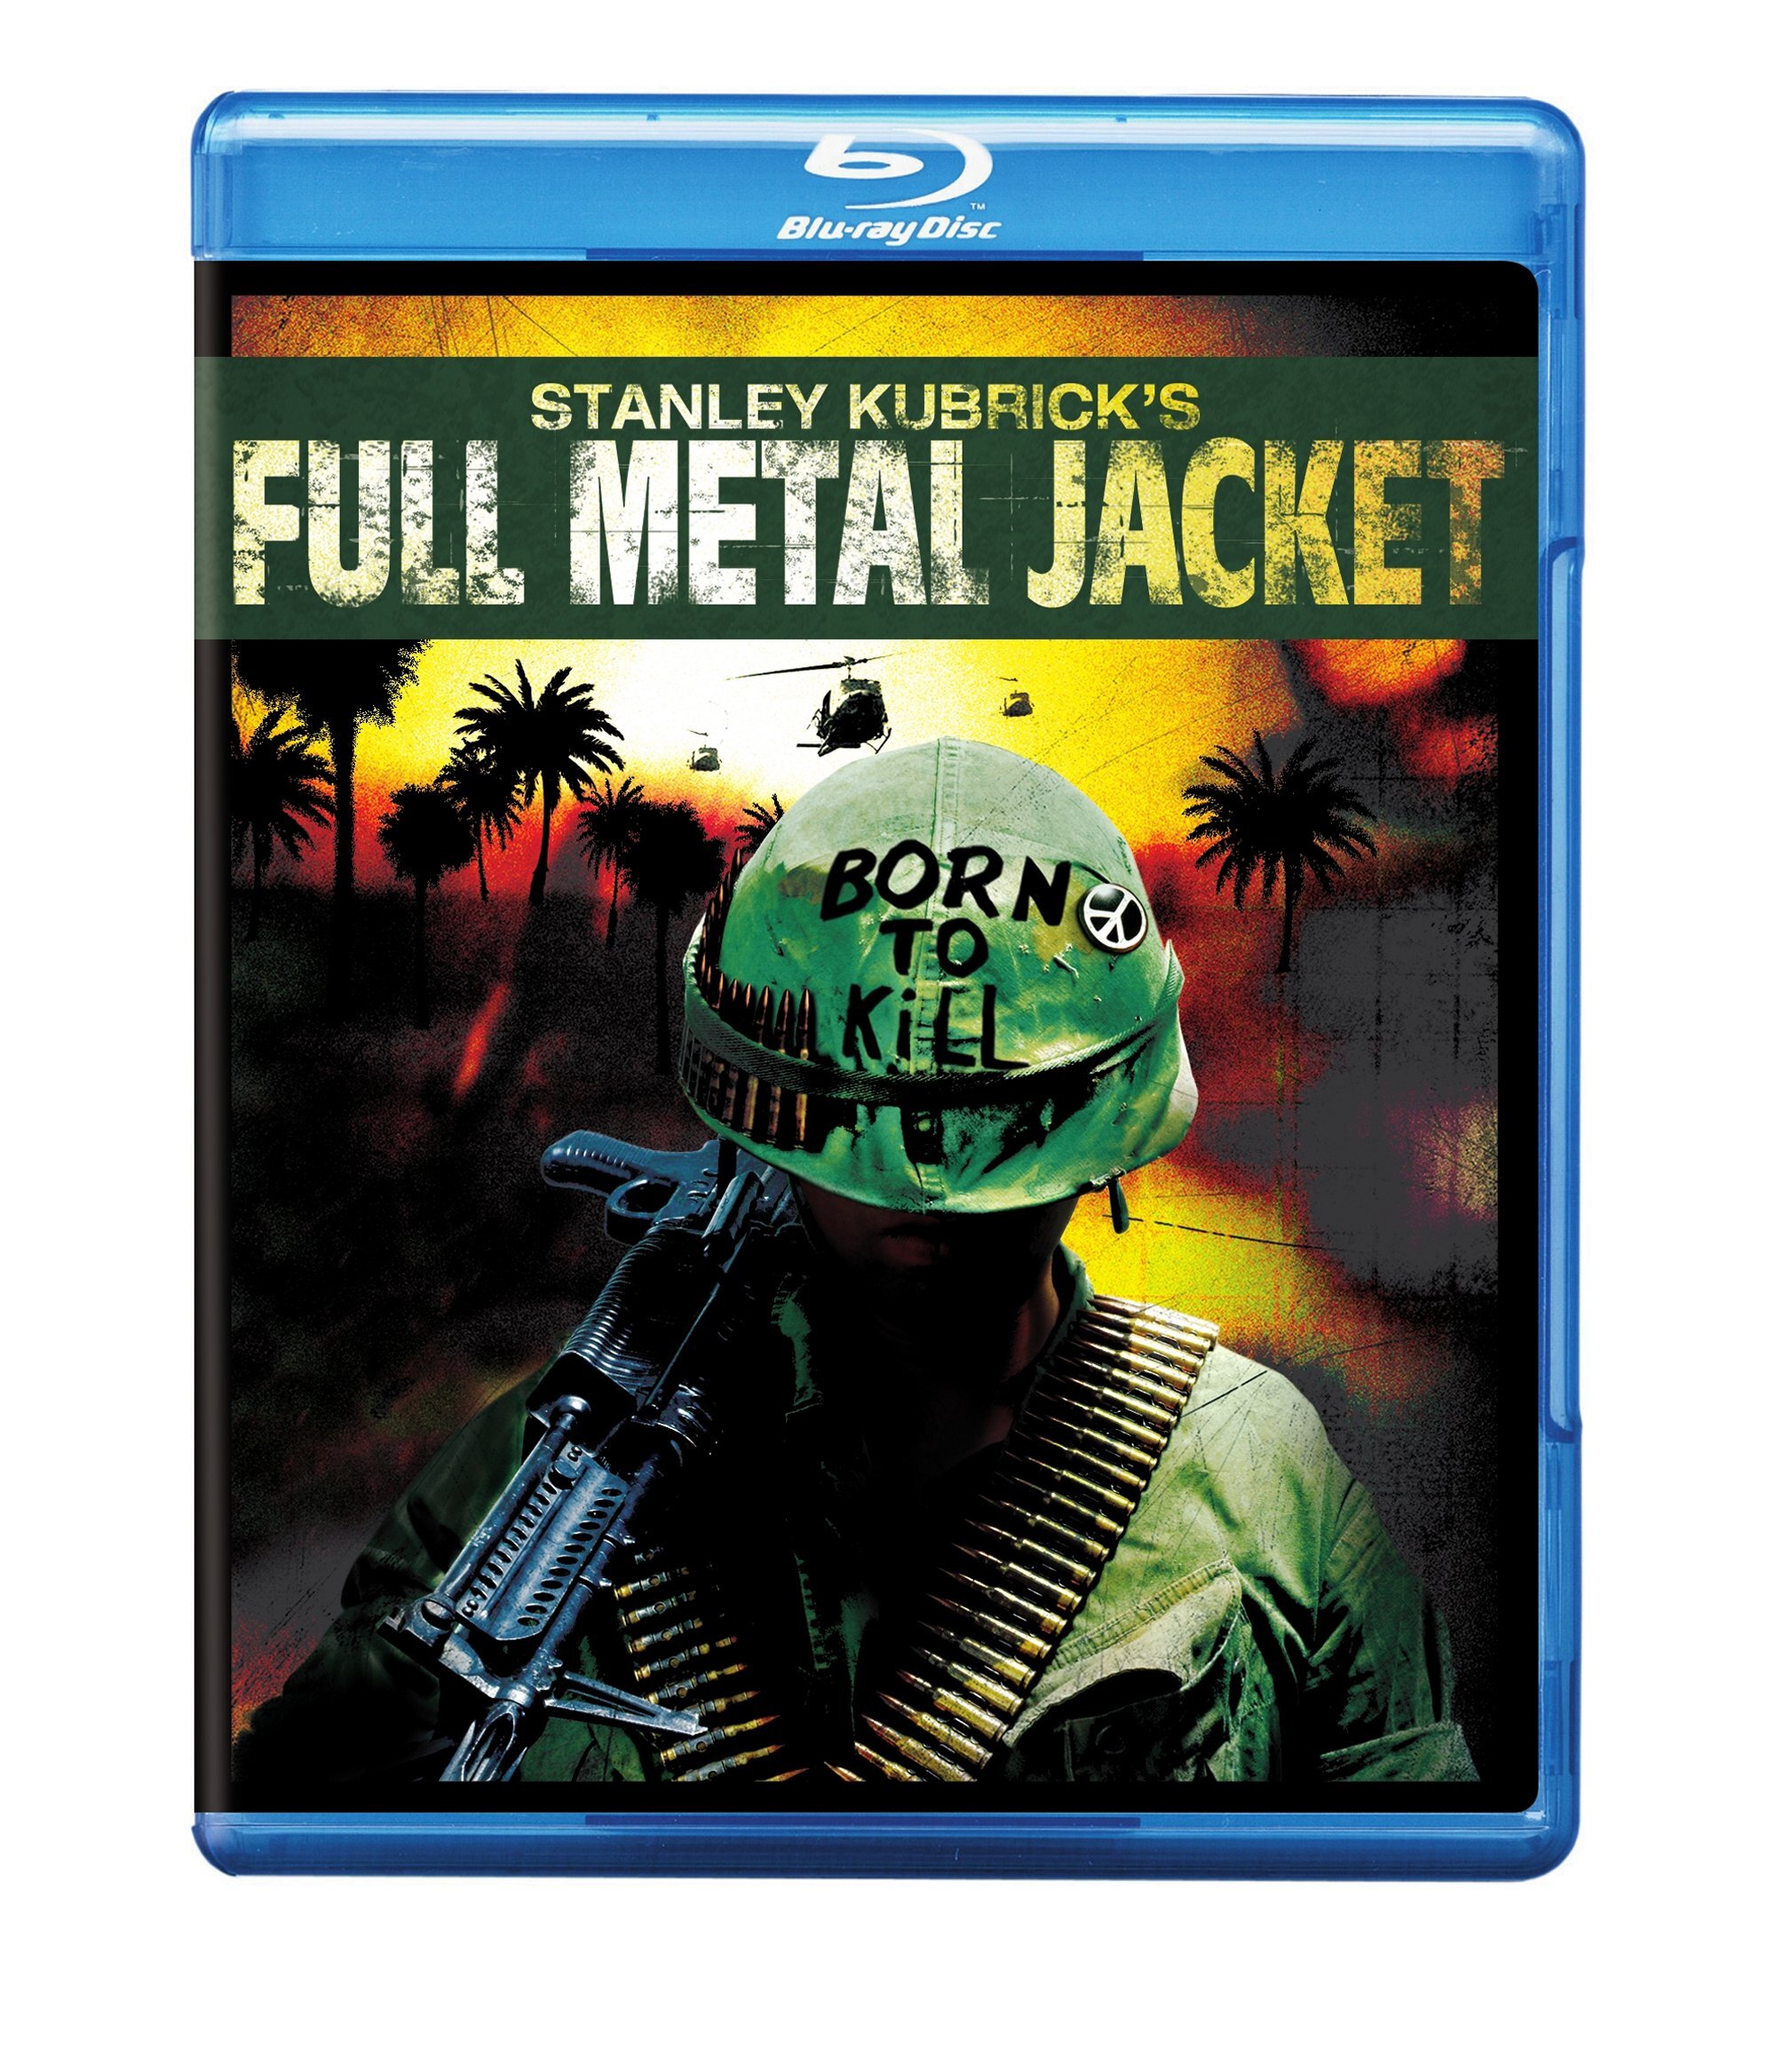 Full Metal Jacket (Deluxe Edition) - Blu-ray [ 1987 ]  - War Movies On Blu-ray - Movies On GRUV